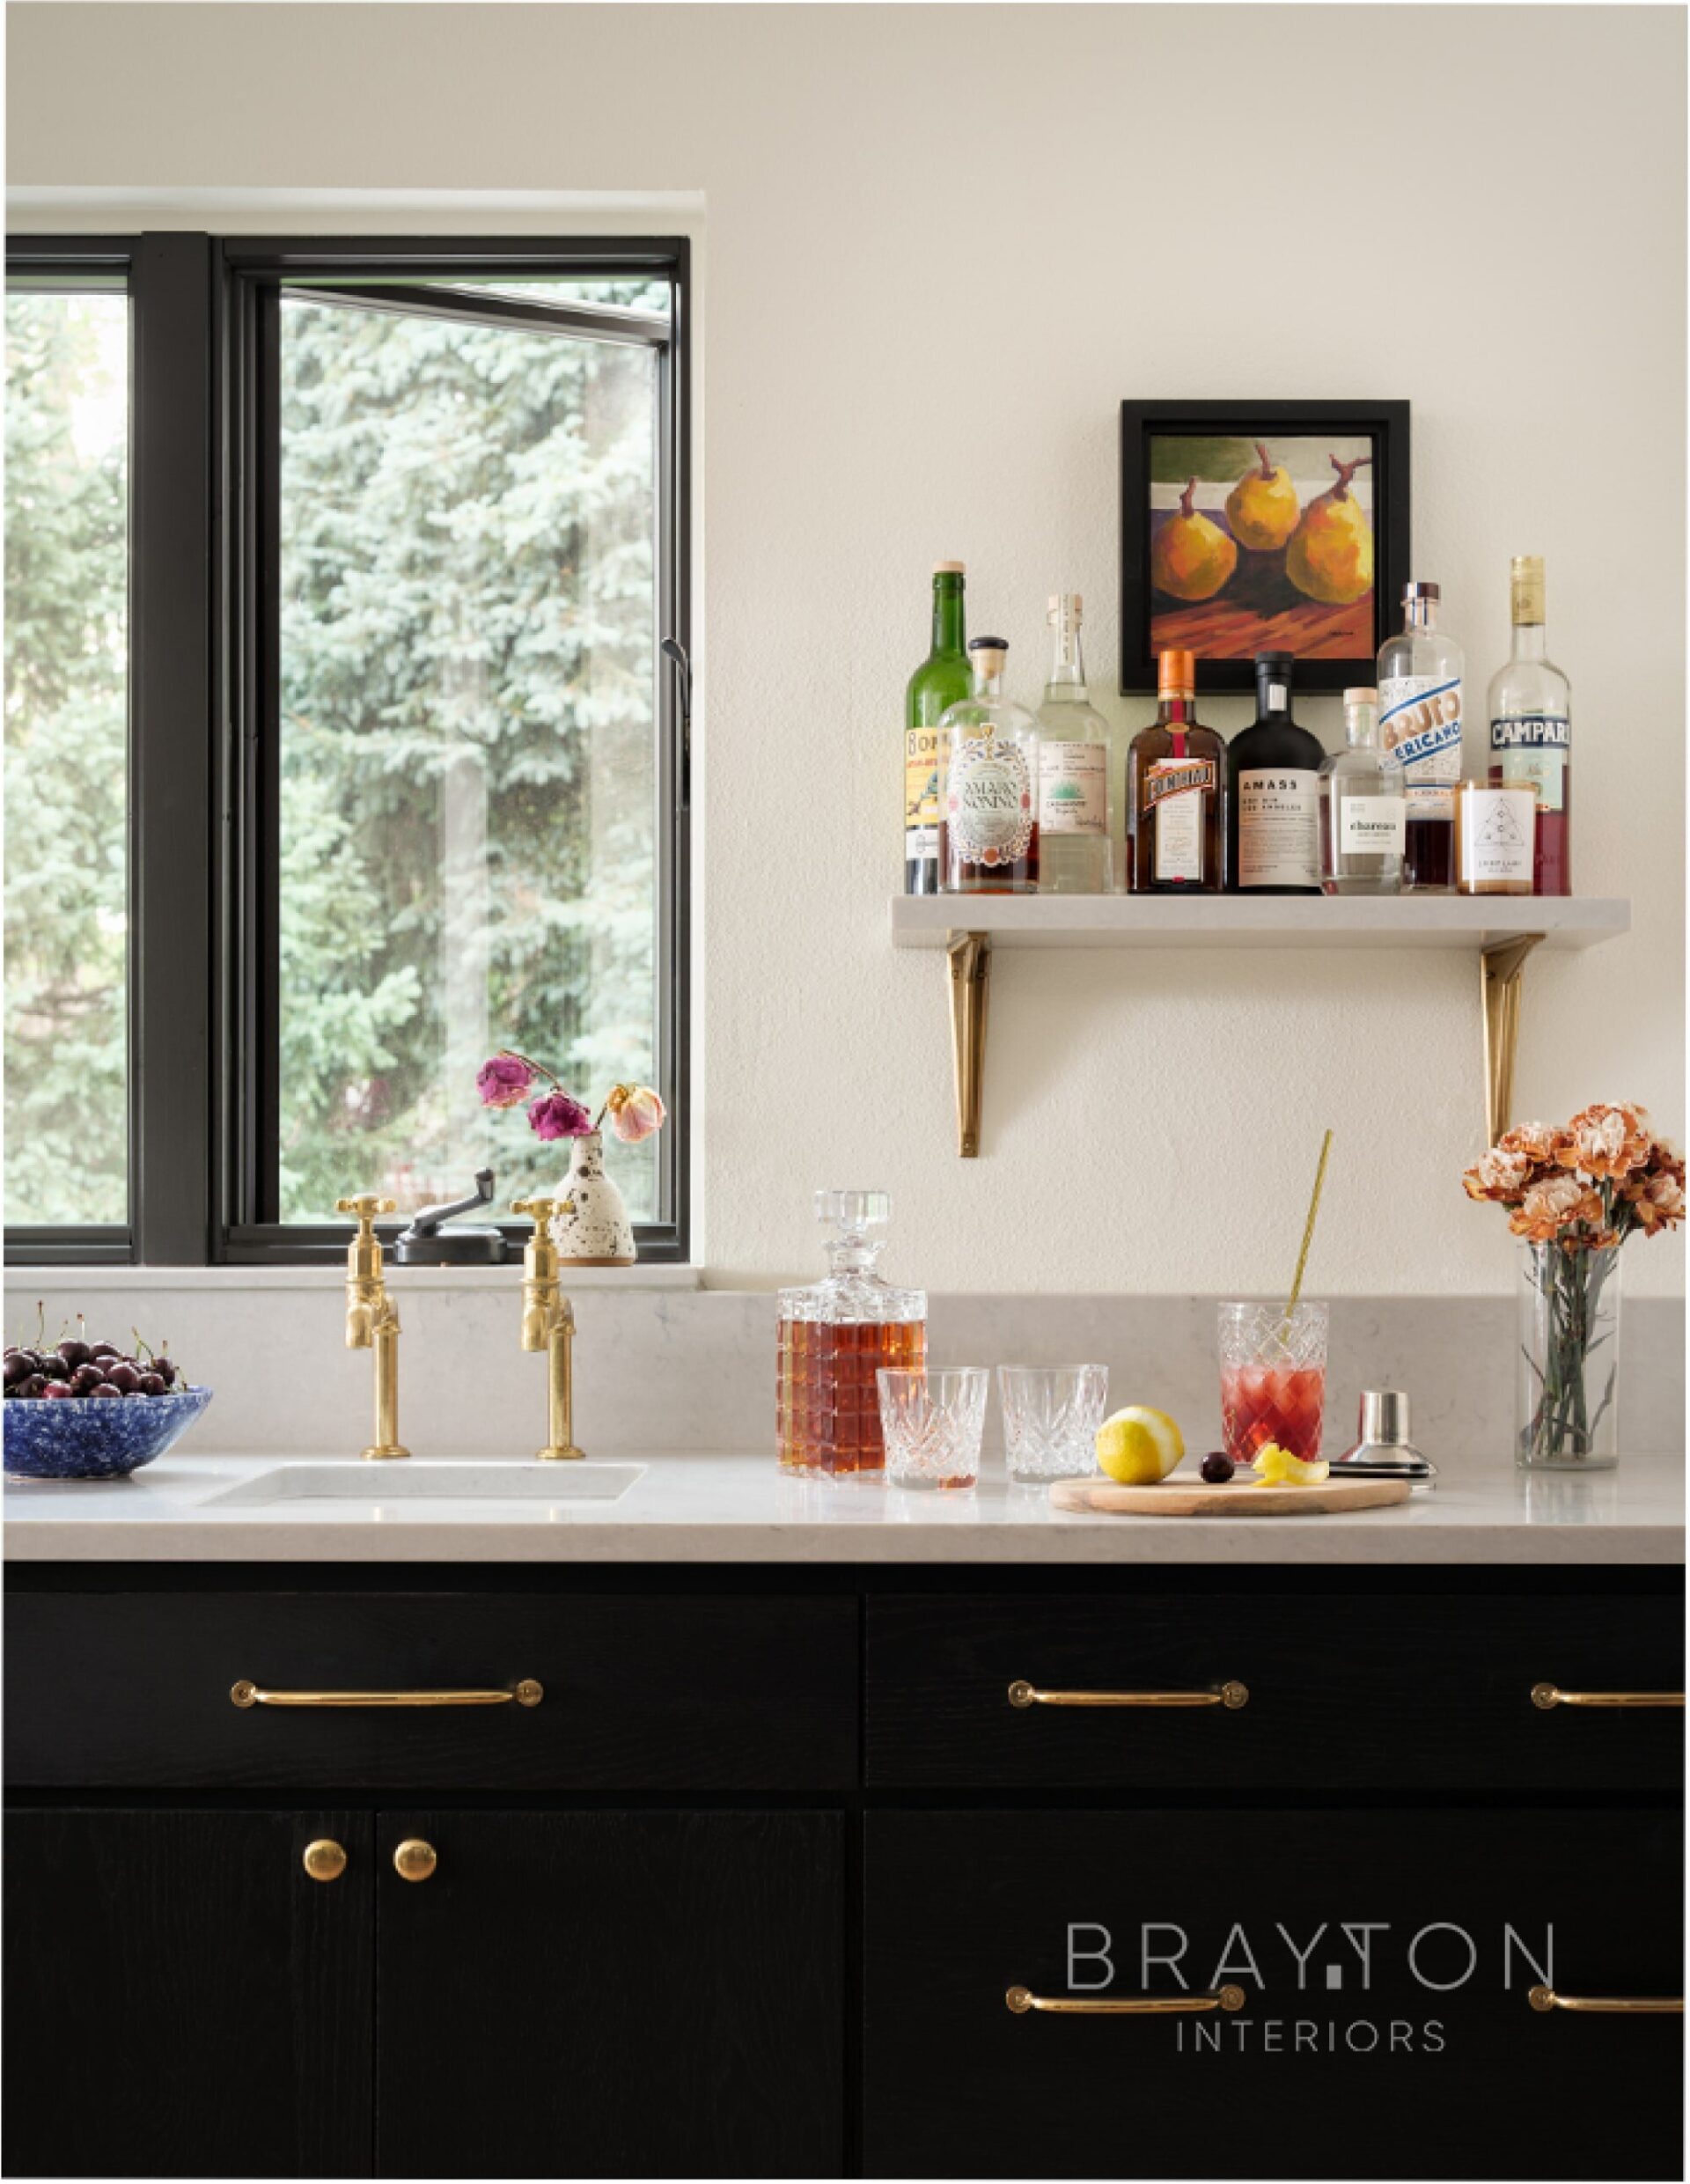 The bar sink features an antique brass faucet that patinas over time, so it only gets better with age.